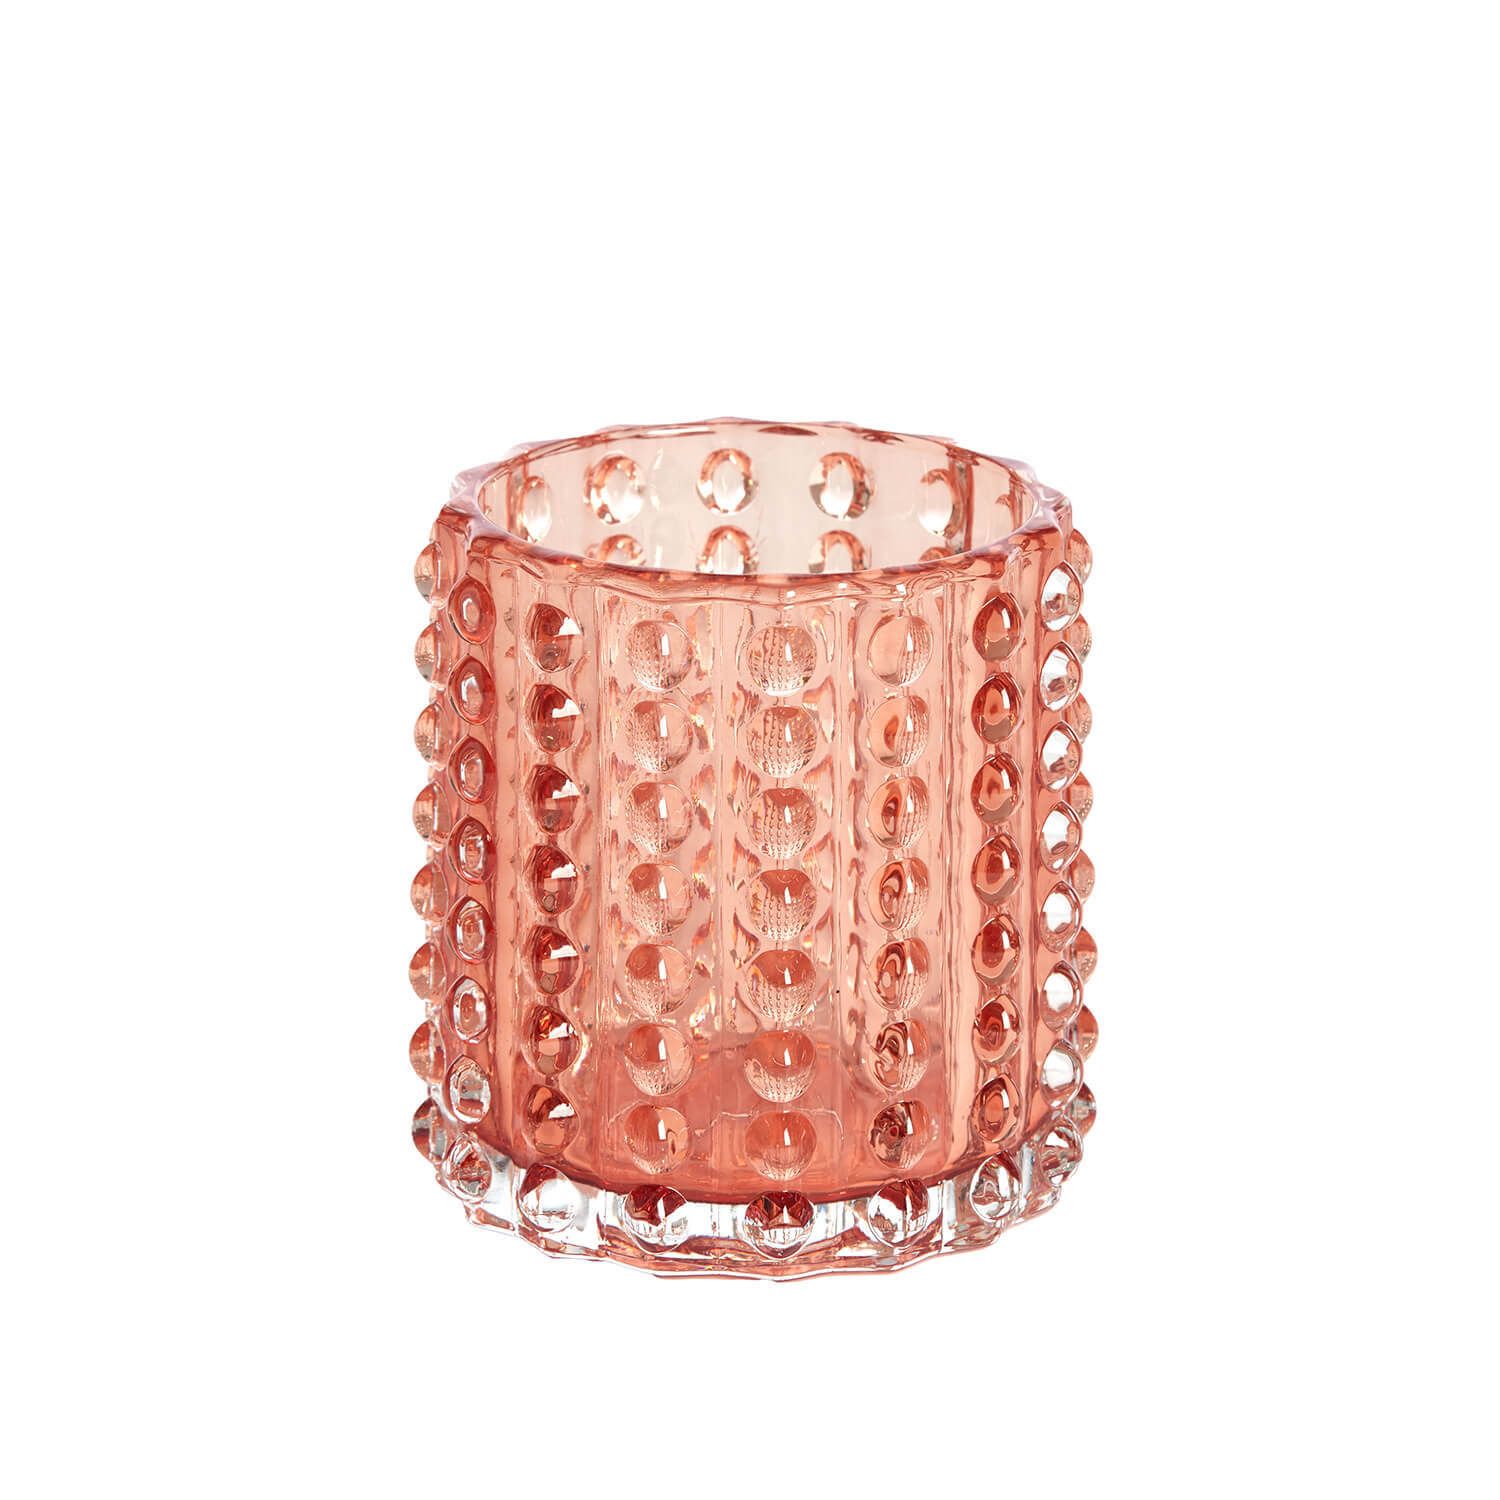 Graham and Green Peach Bubble Tealight Holder - image 1